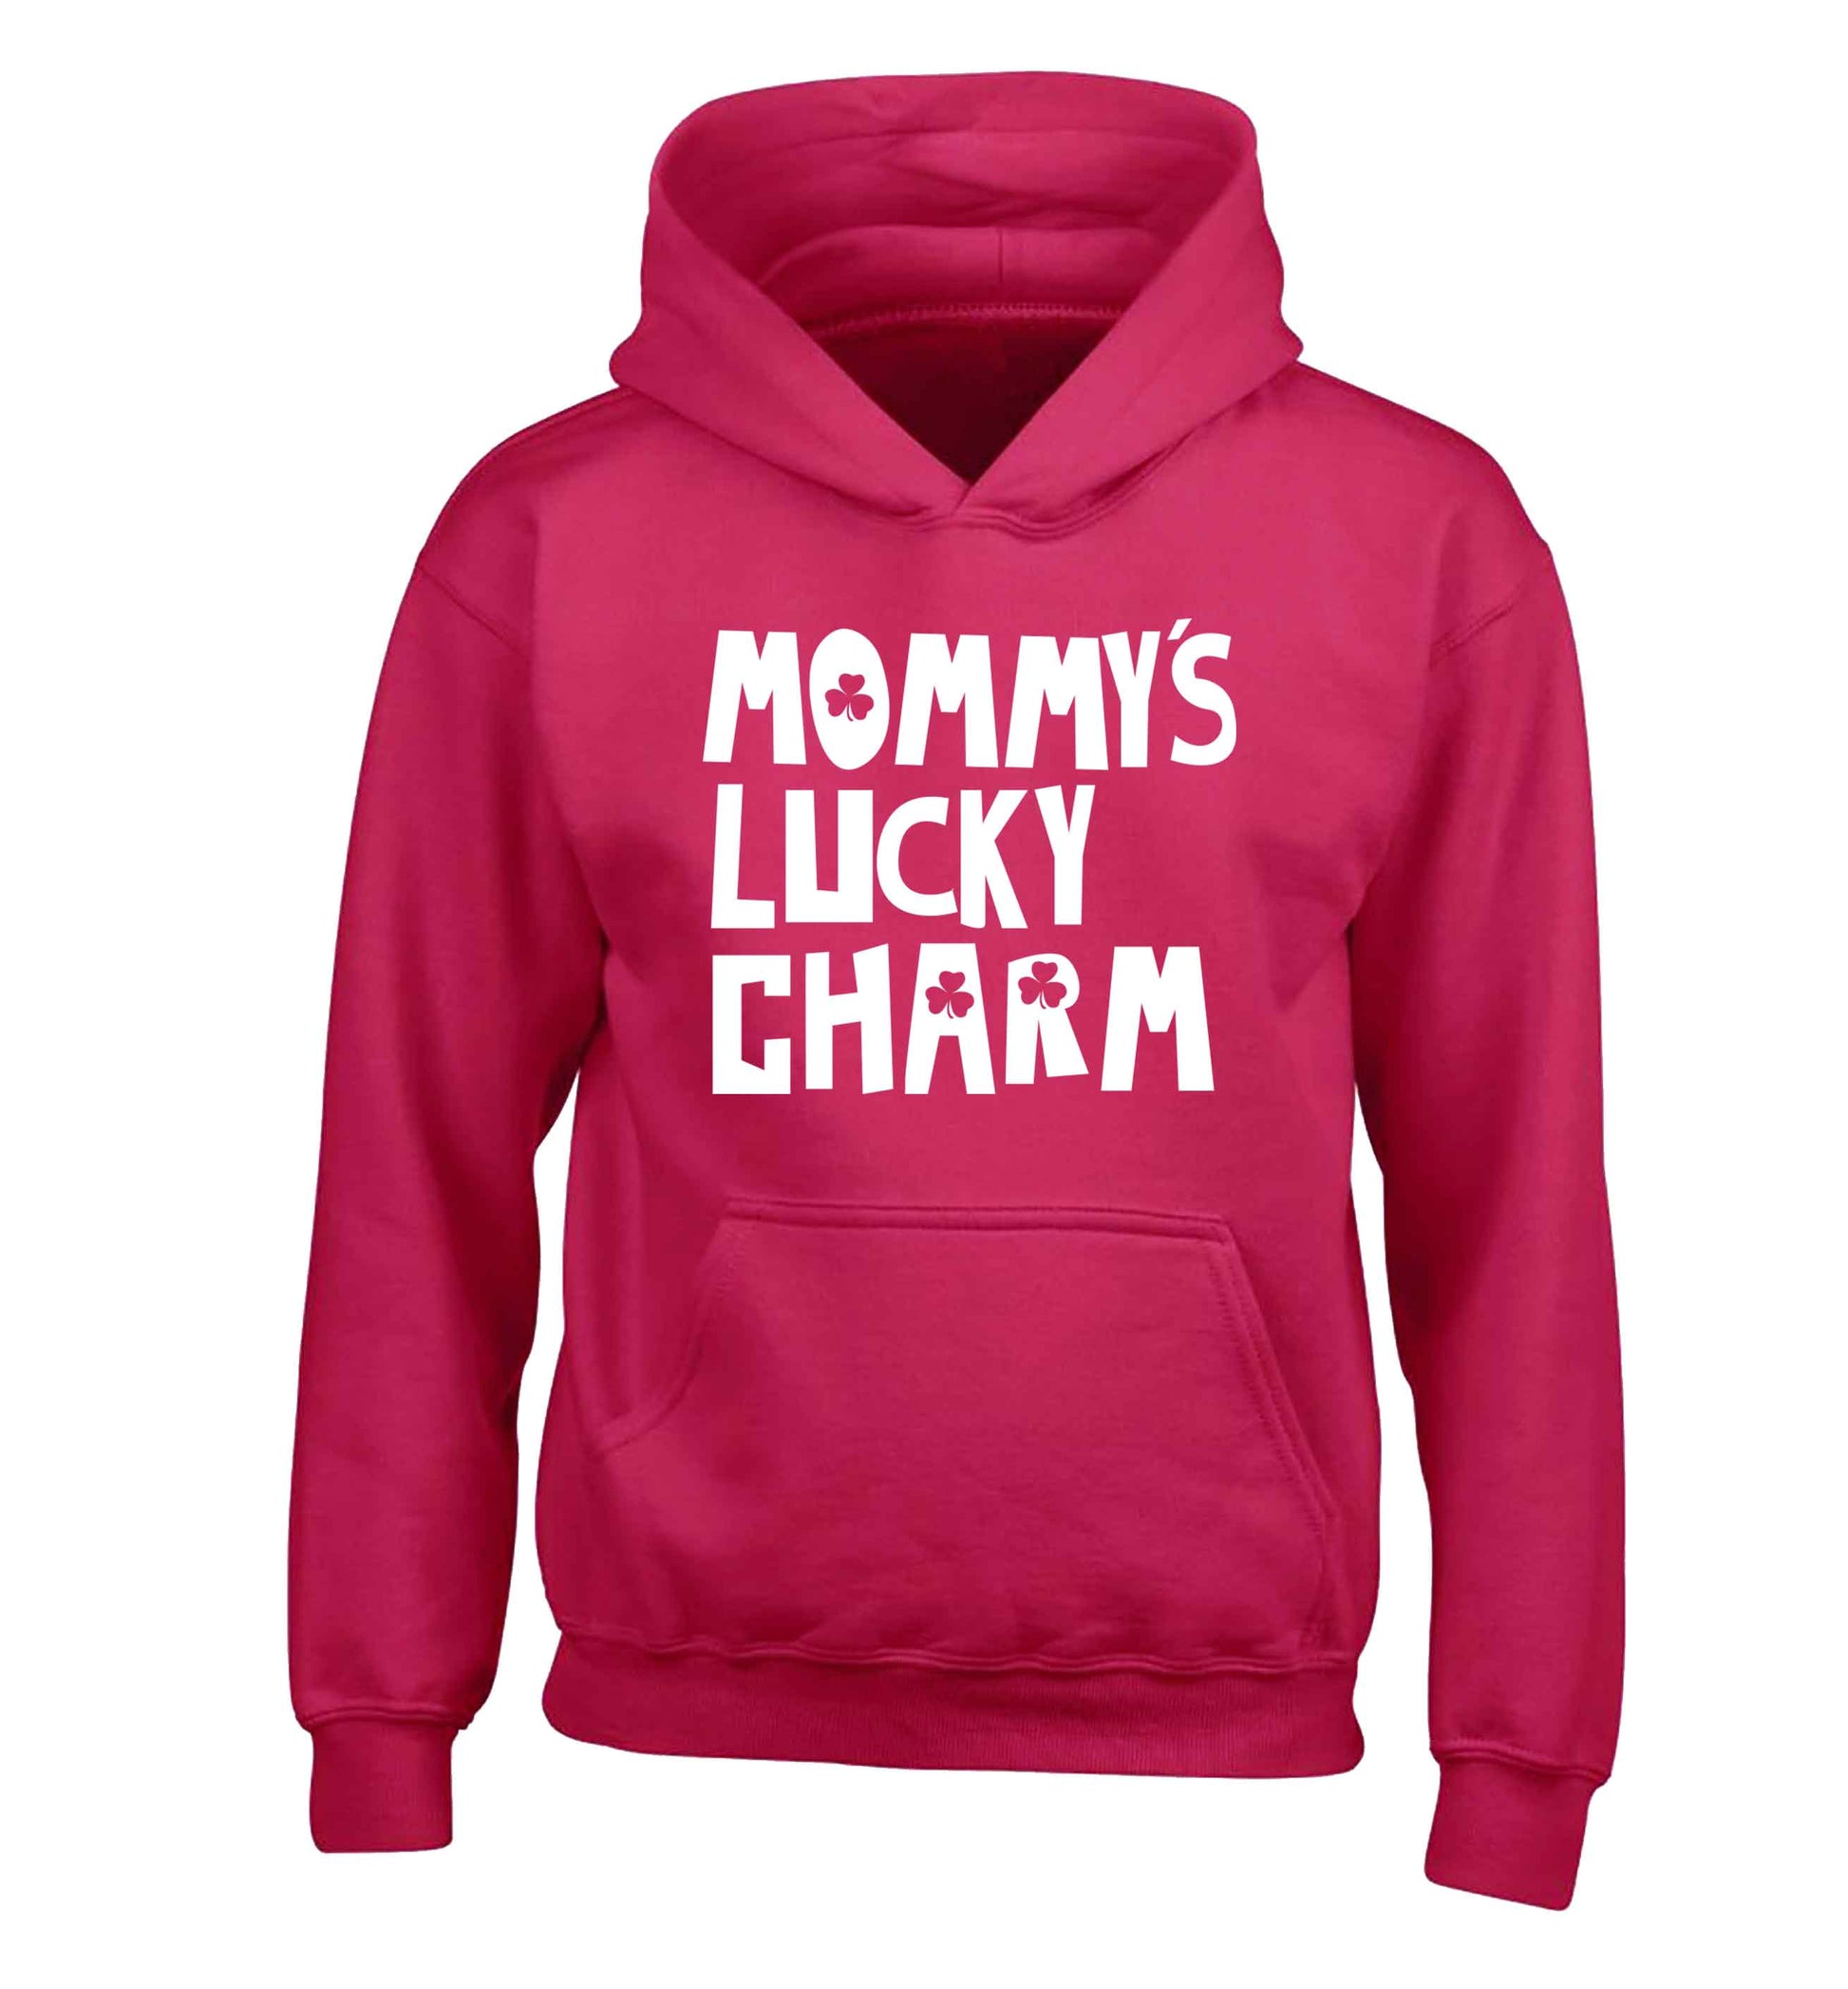 Mommy's lucky charm children's pink hoodie 12-13 Years